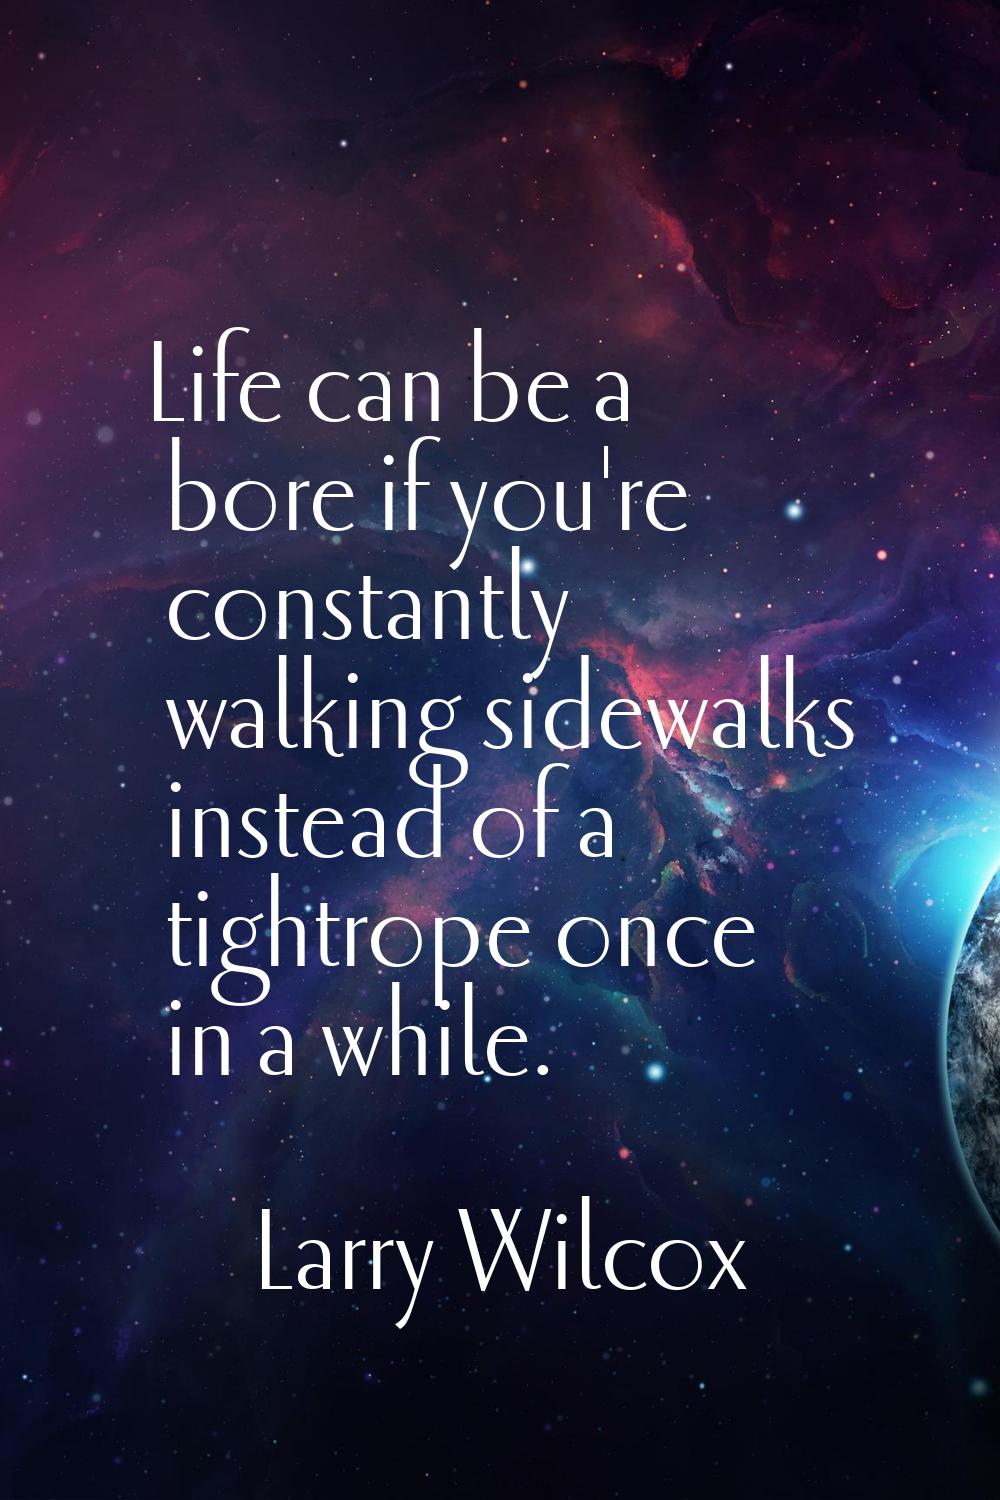 Life can be a bore if you're constantly walking sidewalks instead of a tightrope once in a while.